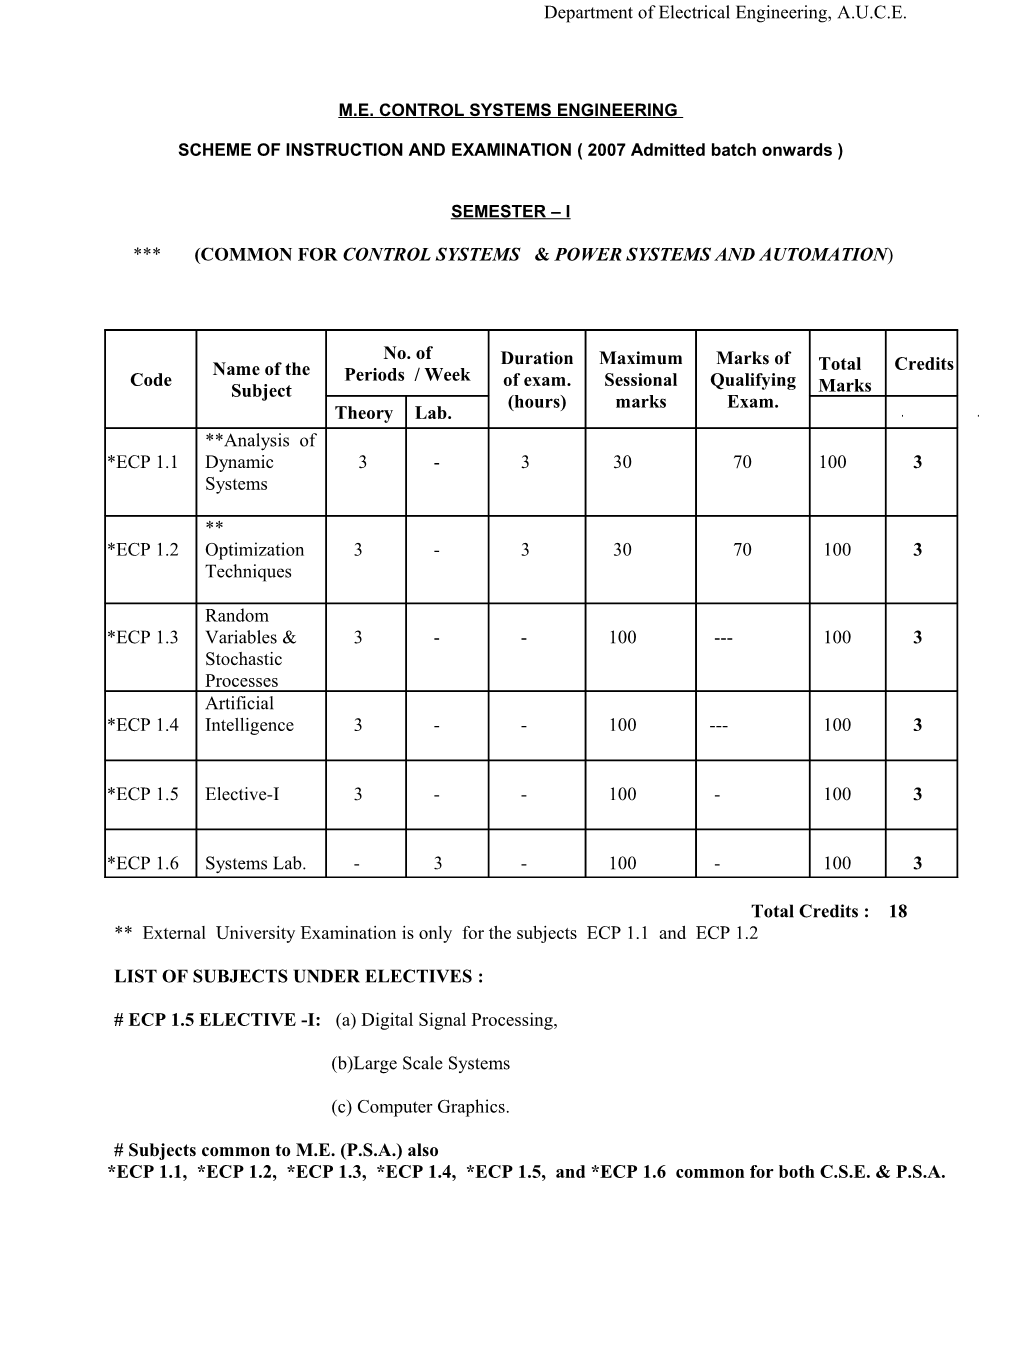 SCHEME of INSTRUCTION and EXAMINATION ( 2007 Admitted Batch Onwards )